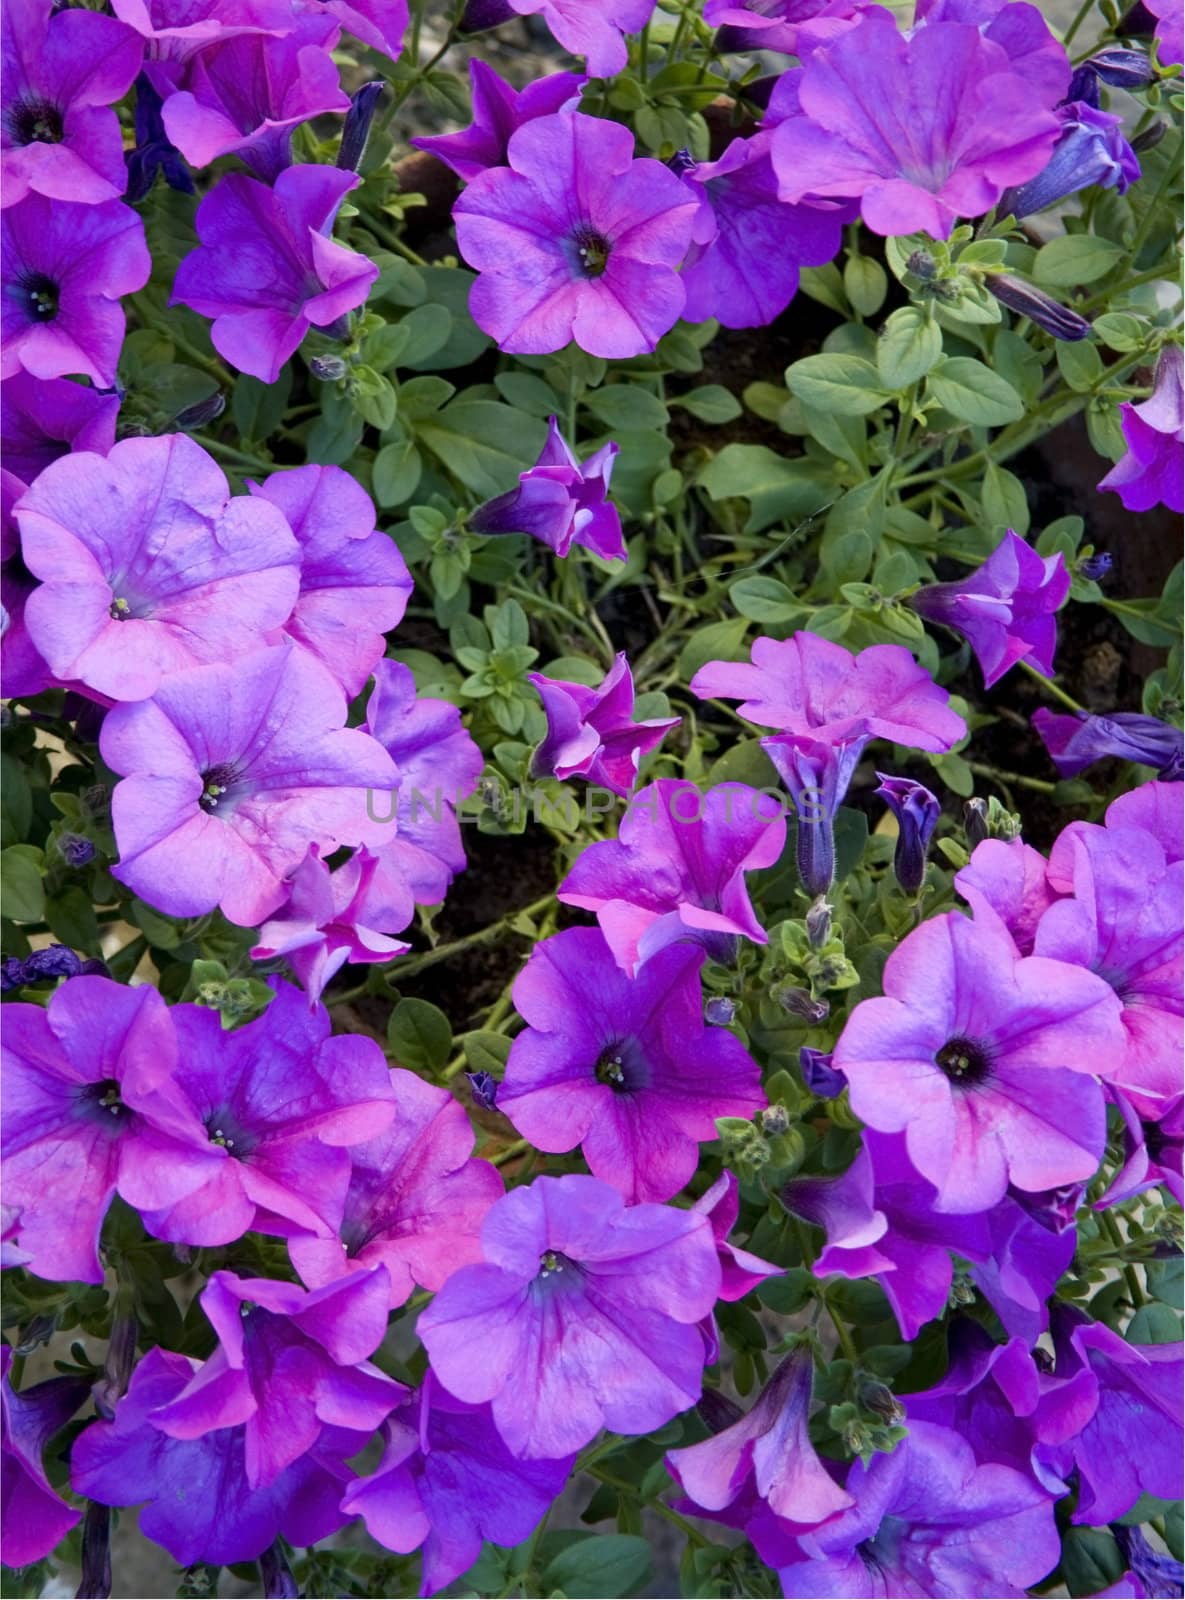 Violet petunias by magraphics